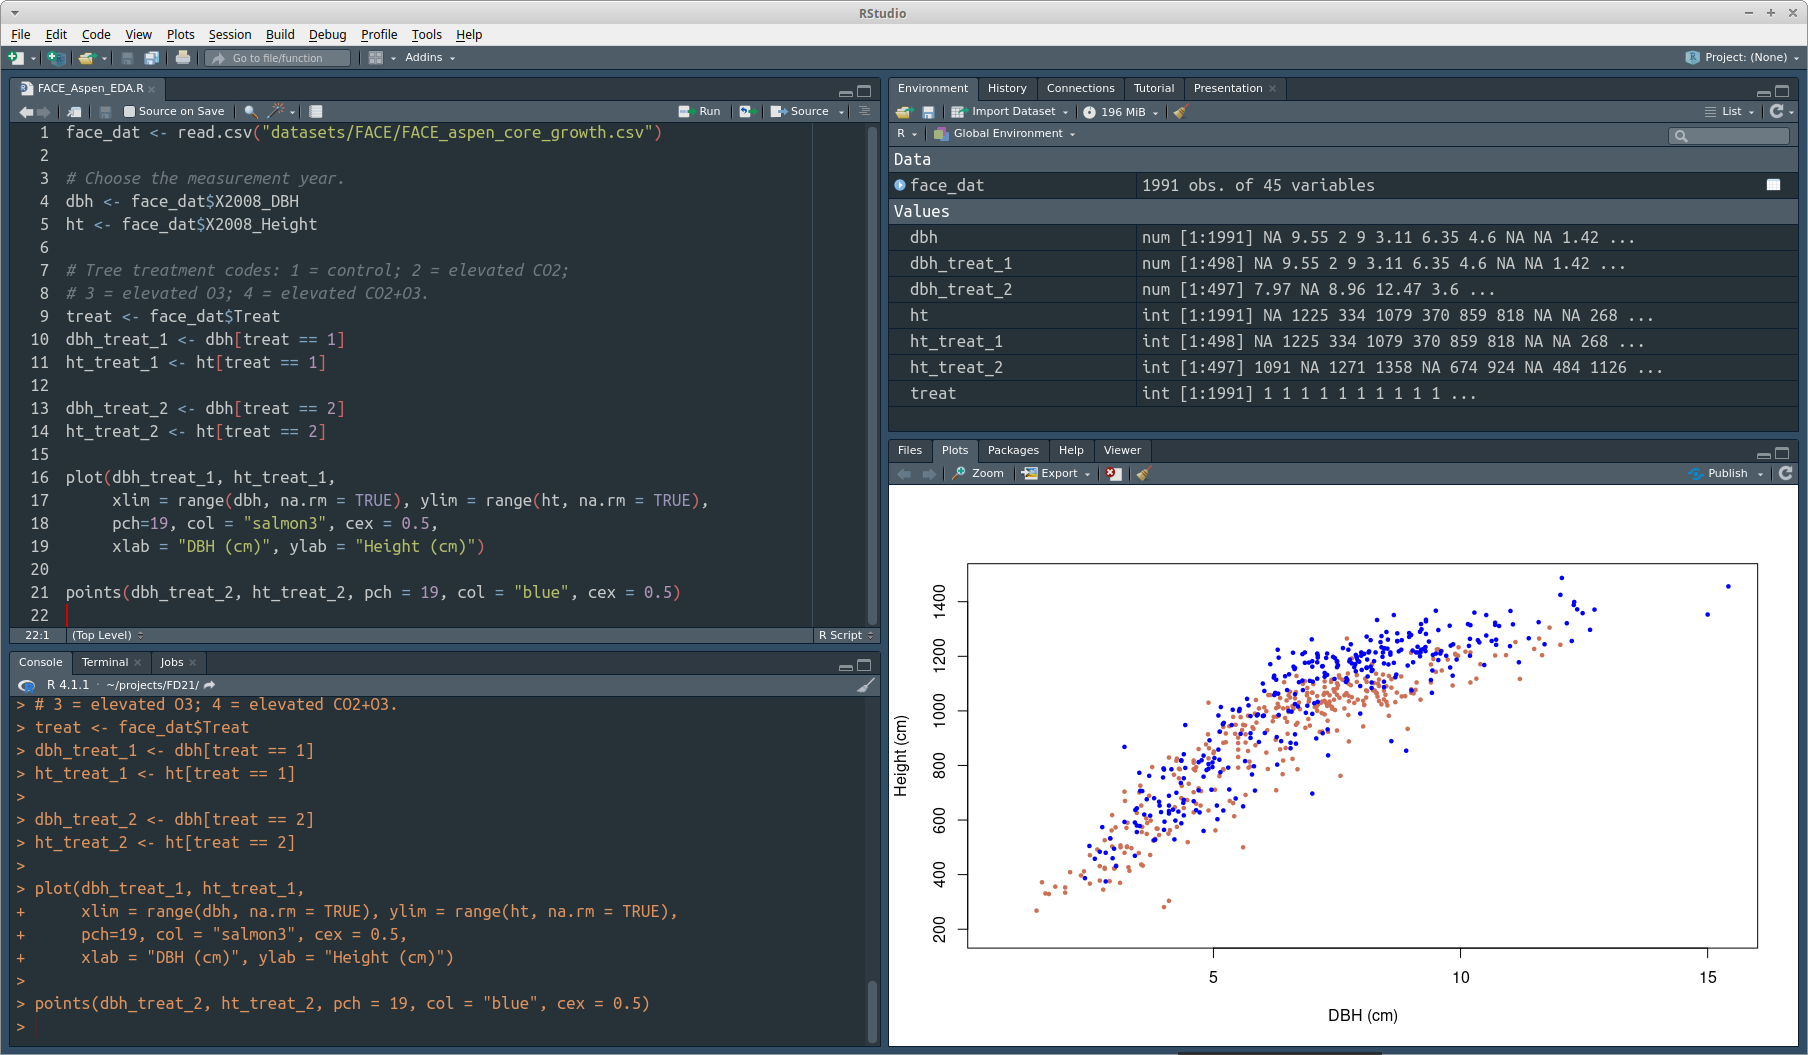 The RStudio IDE using the Modern theme and Material Editor theme.